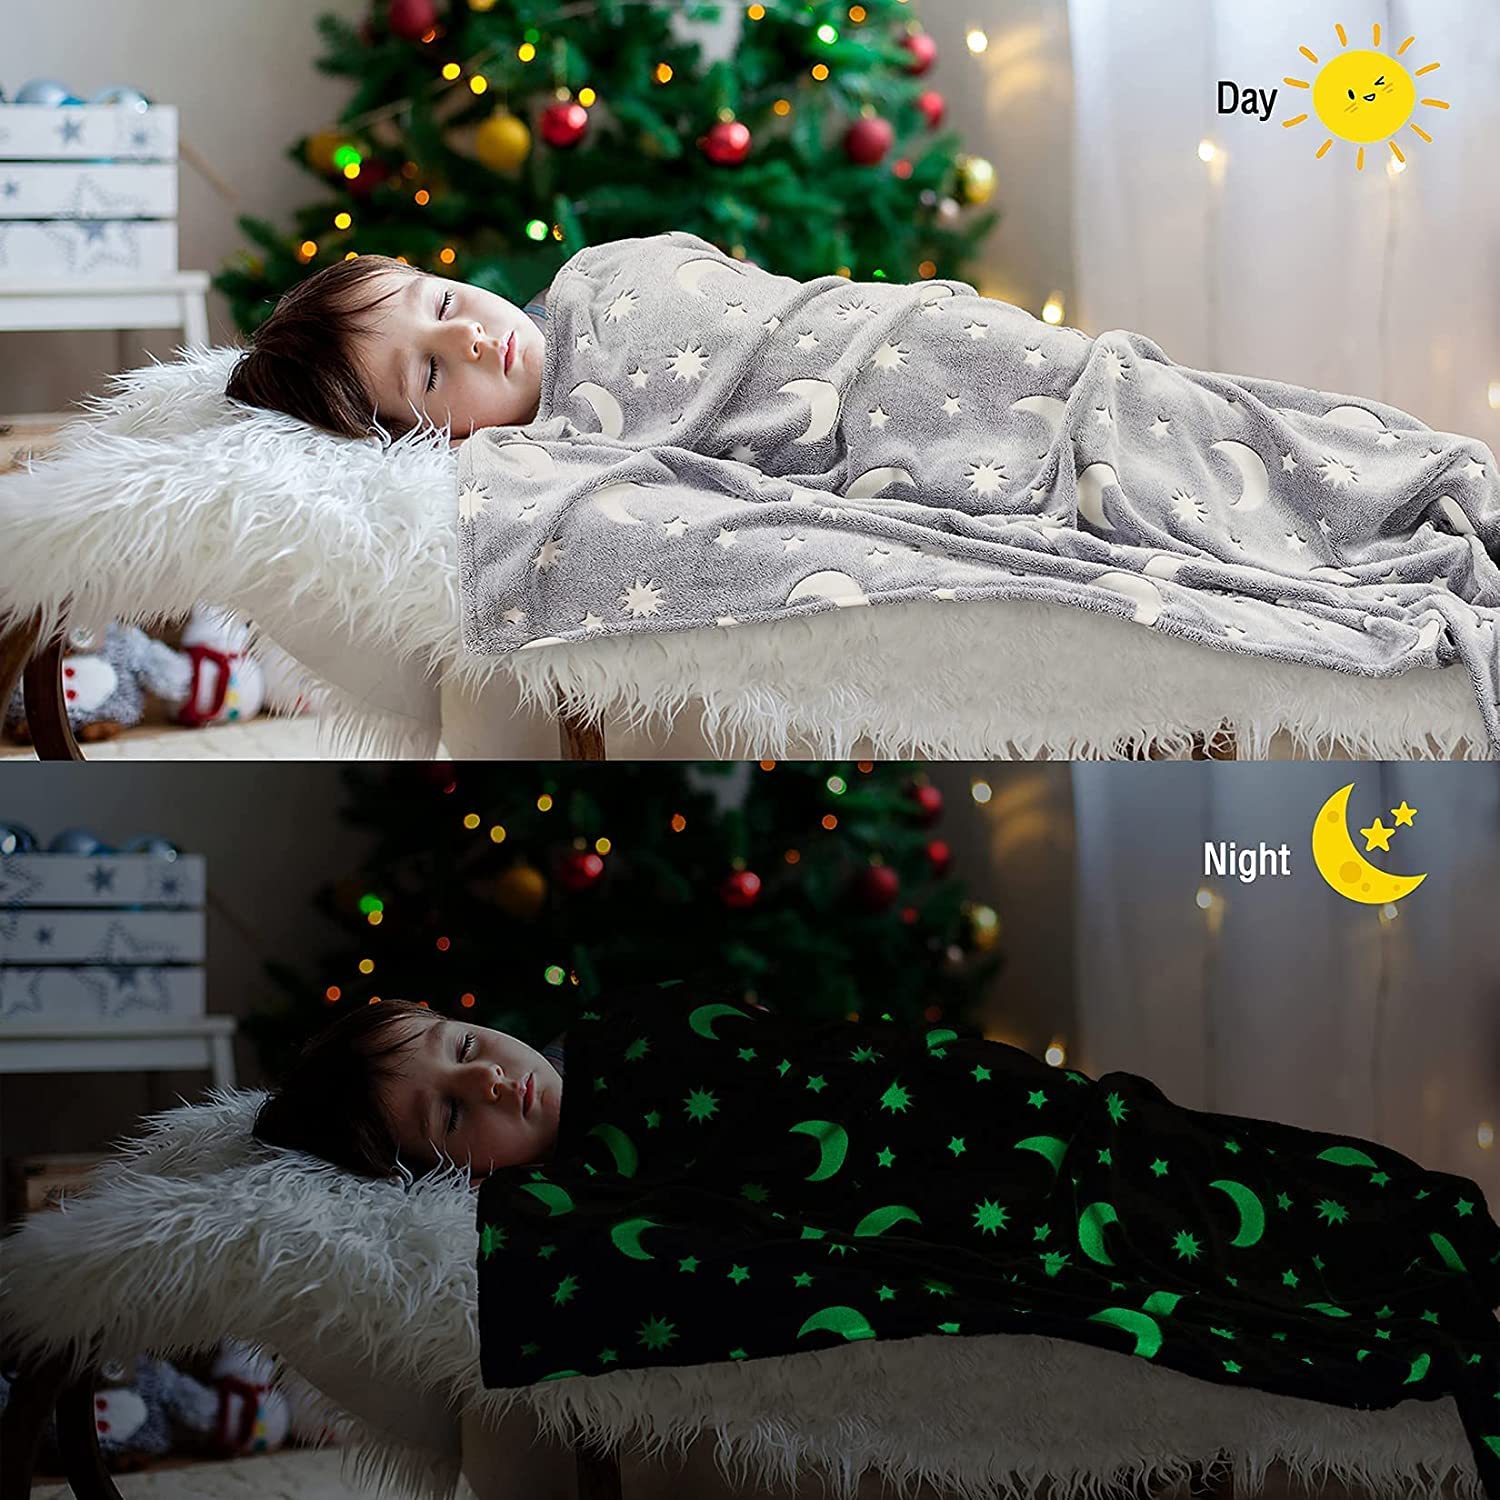 Starry Night Moon and Stars Glow in The Dark Blanket for Kids | 200 x 152cm, 0-15 Years, Queen Size Flannel Blanket | Birthday Gift for Kids Bed, Sofa, or Couch